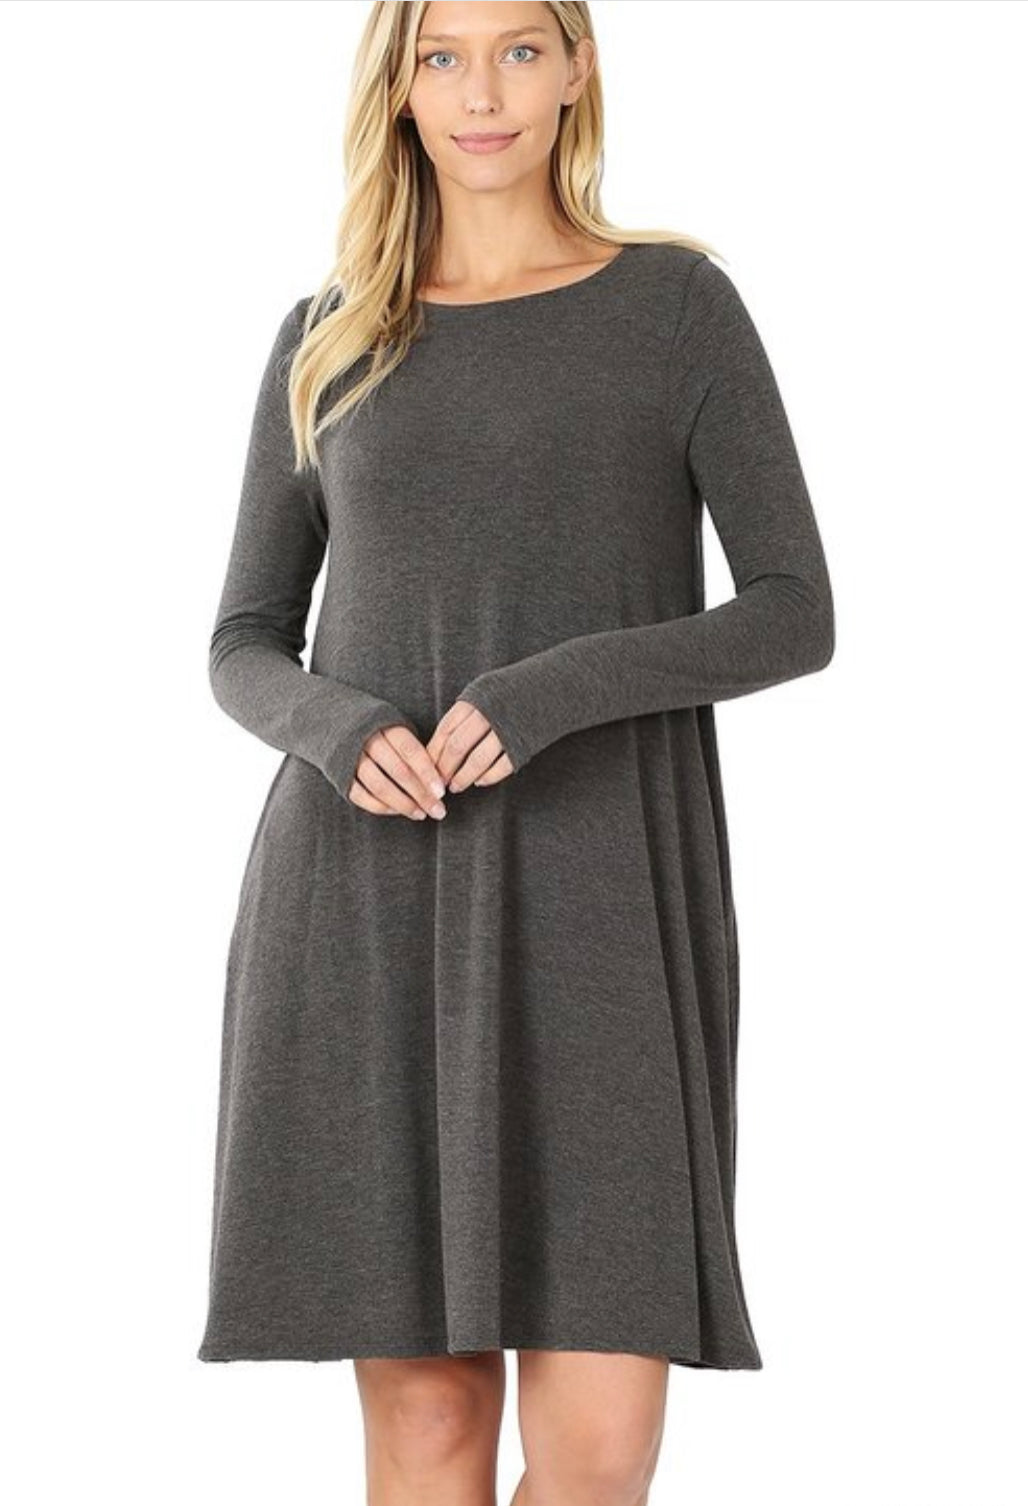 Long Sleeve Dress with pockets